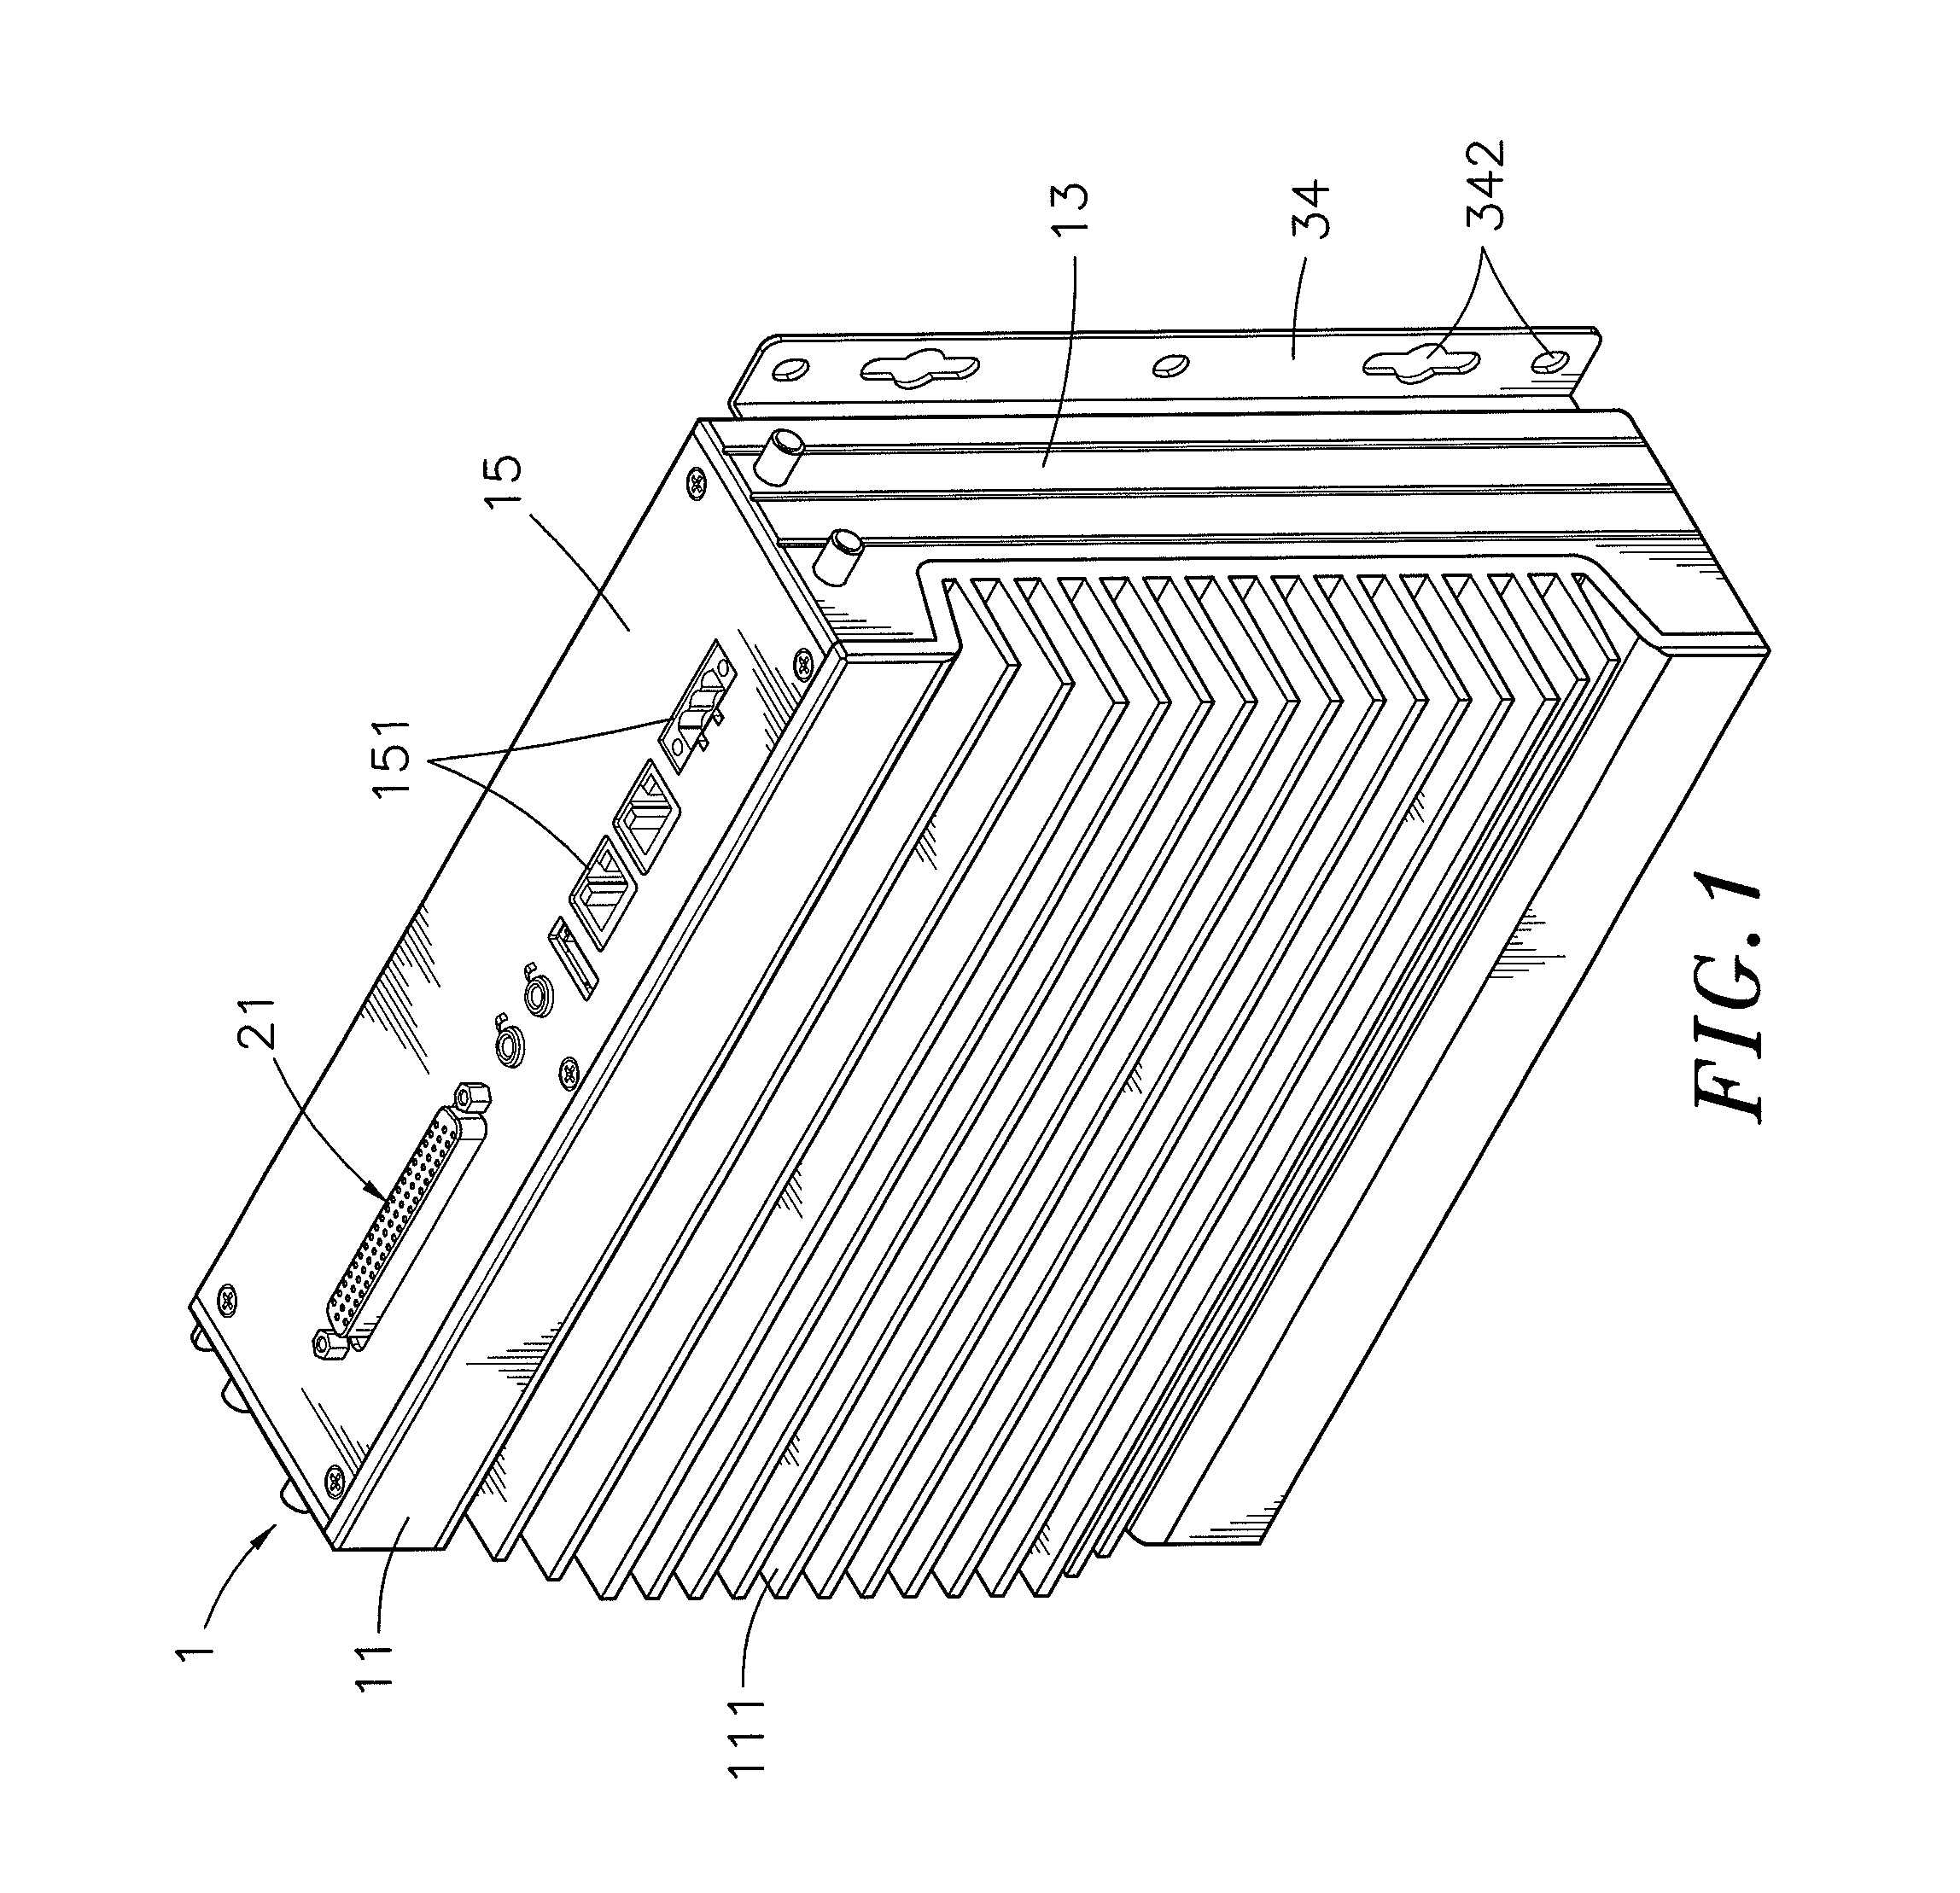 Wall-mounting structure for wall-mounted electronic device